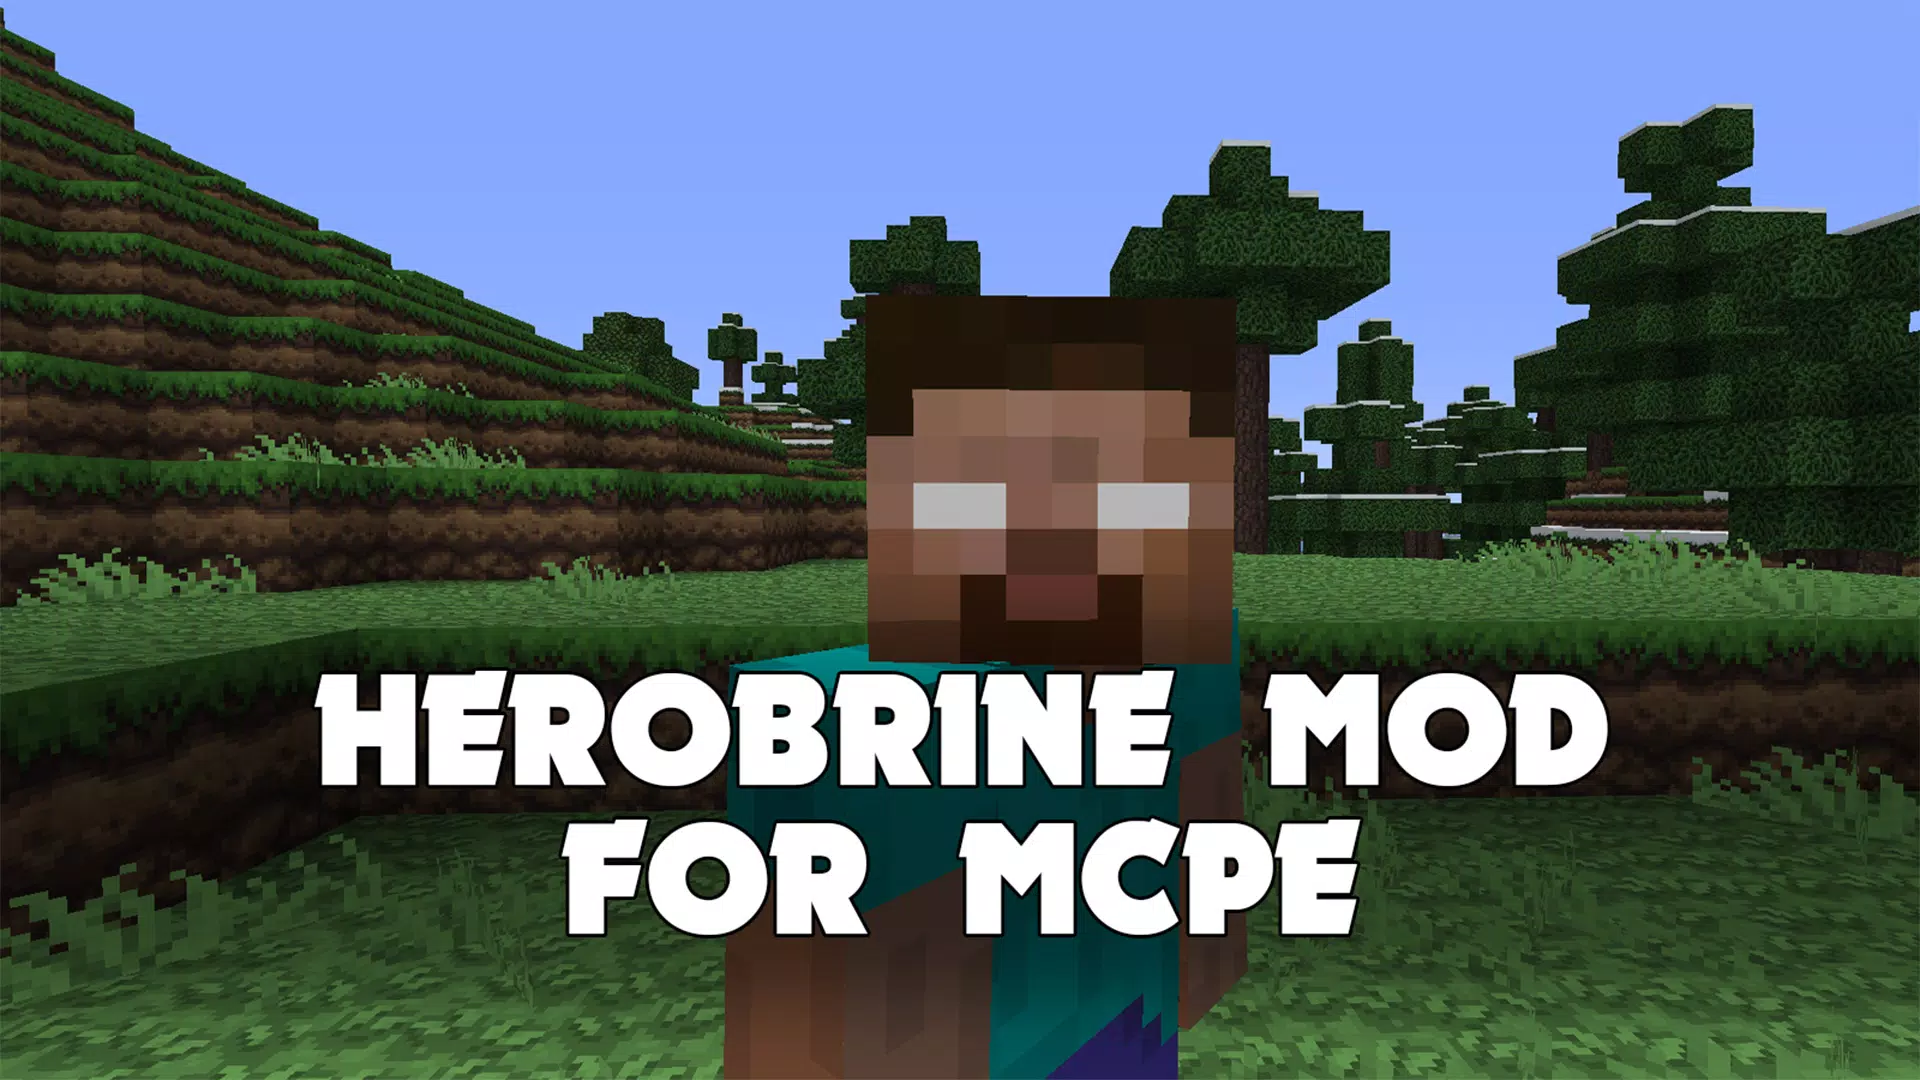 Herobrine PH - Bully anniversary edition Apk:    Obb:   How to install? 1). Install Apk 2).Place Data in